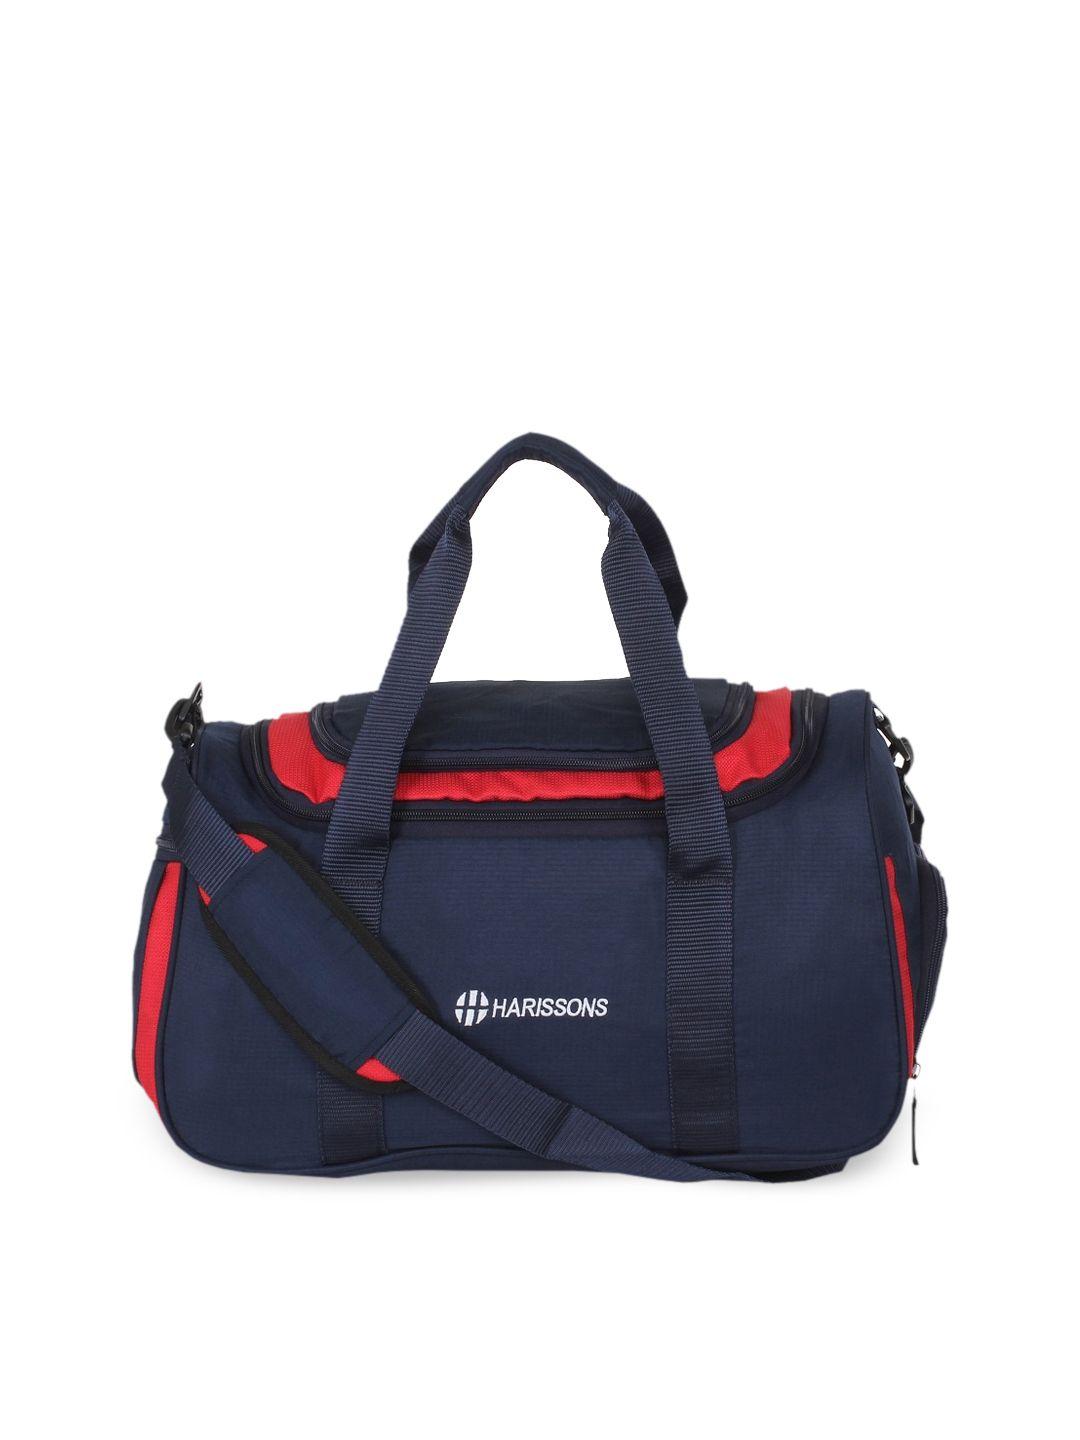 harissons blue & red solid duffle bag